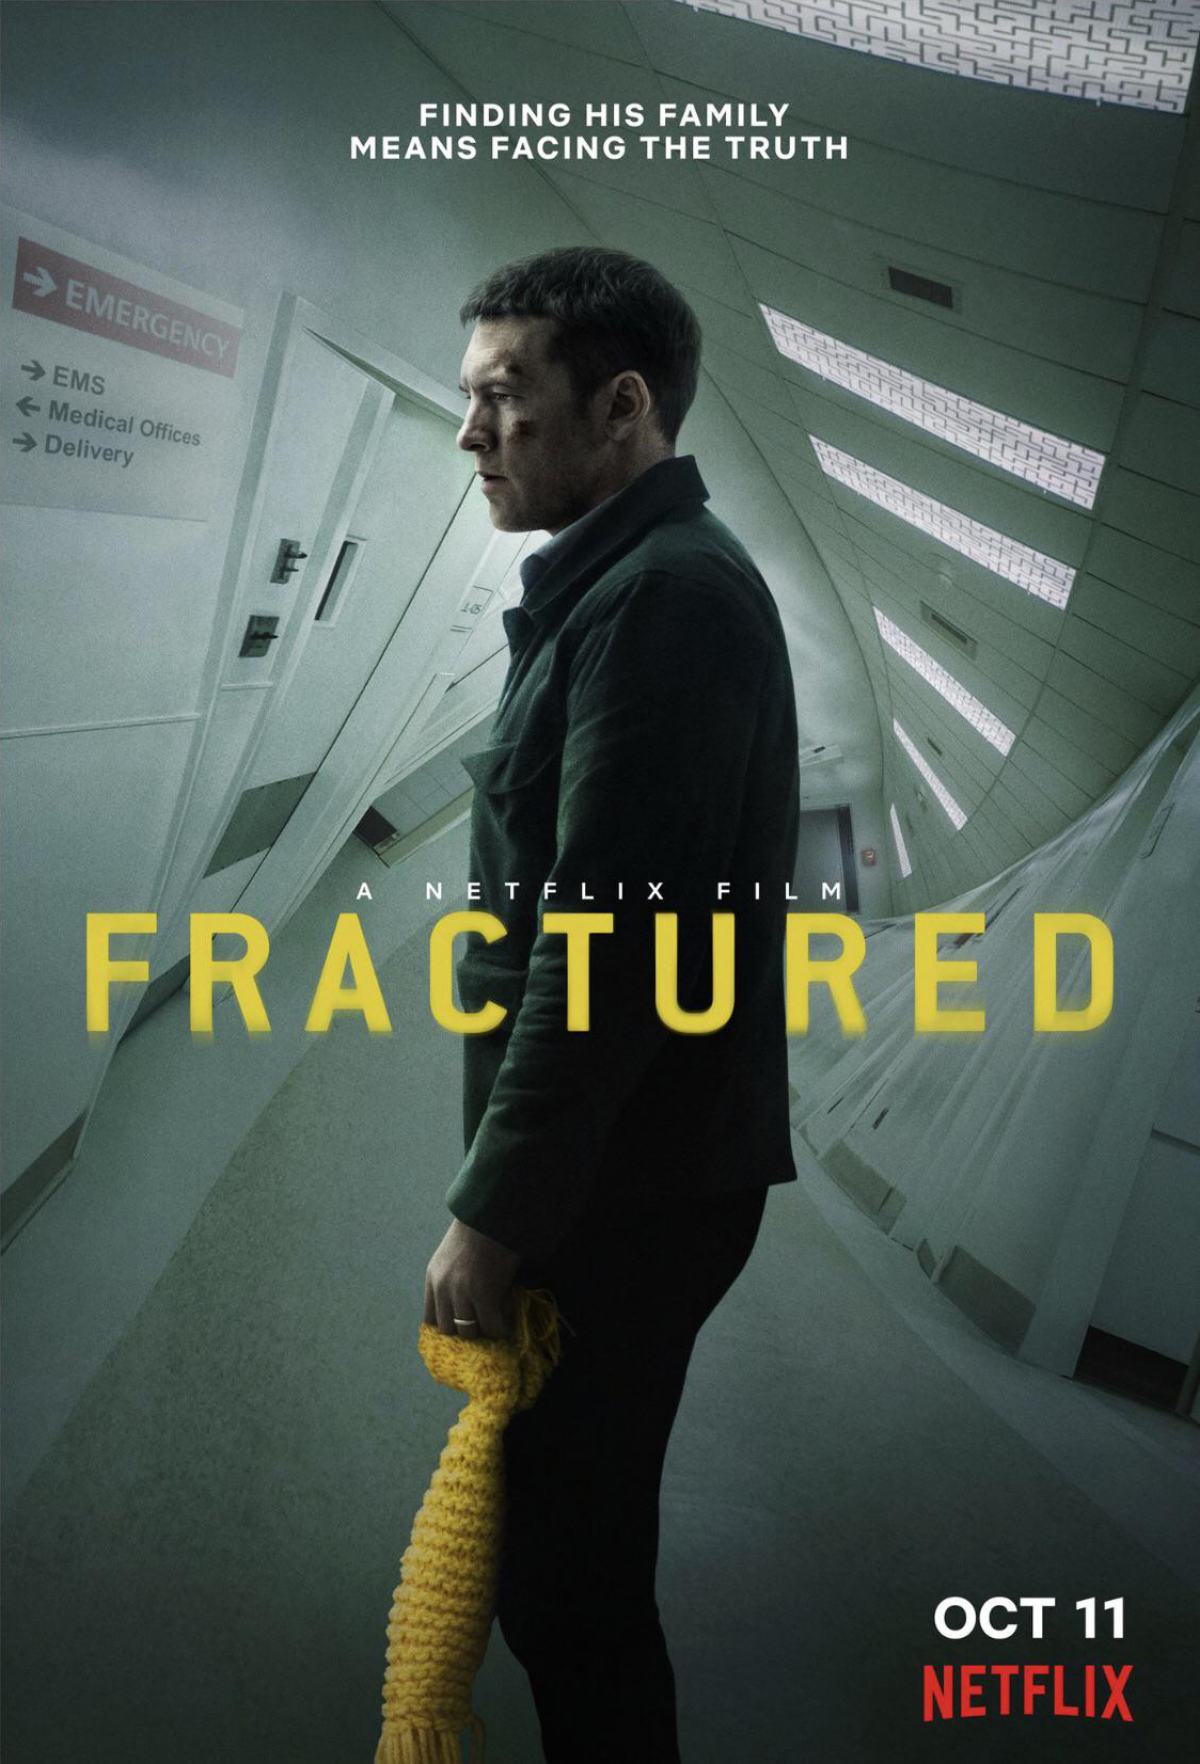 2019 Fractured